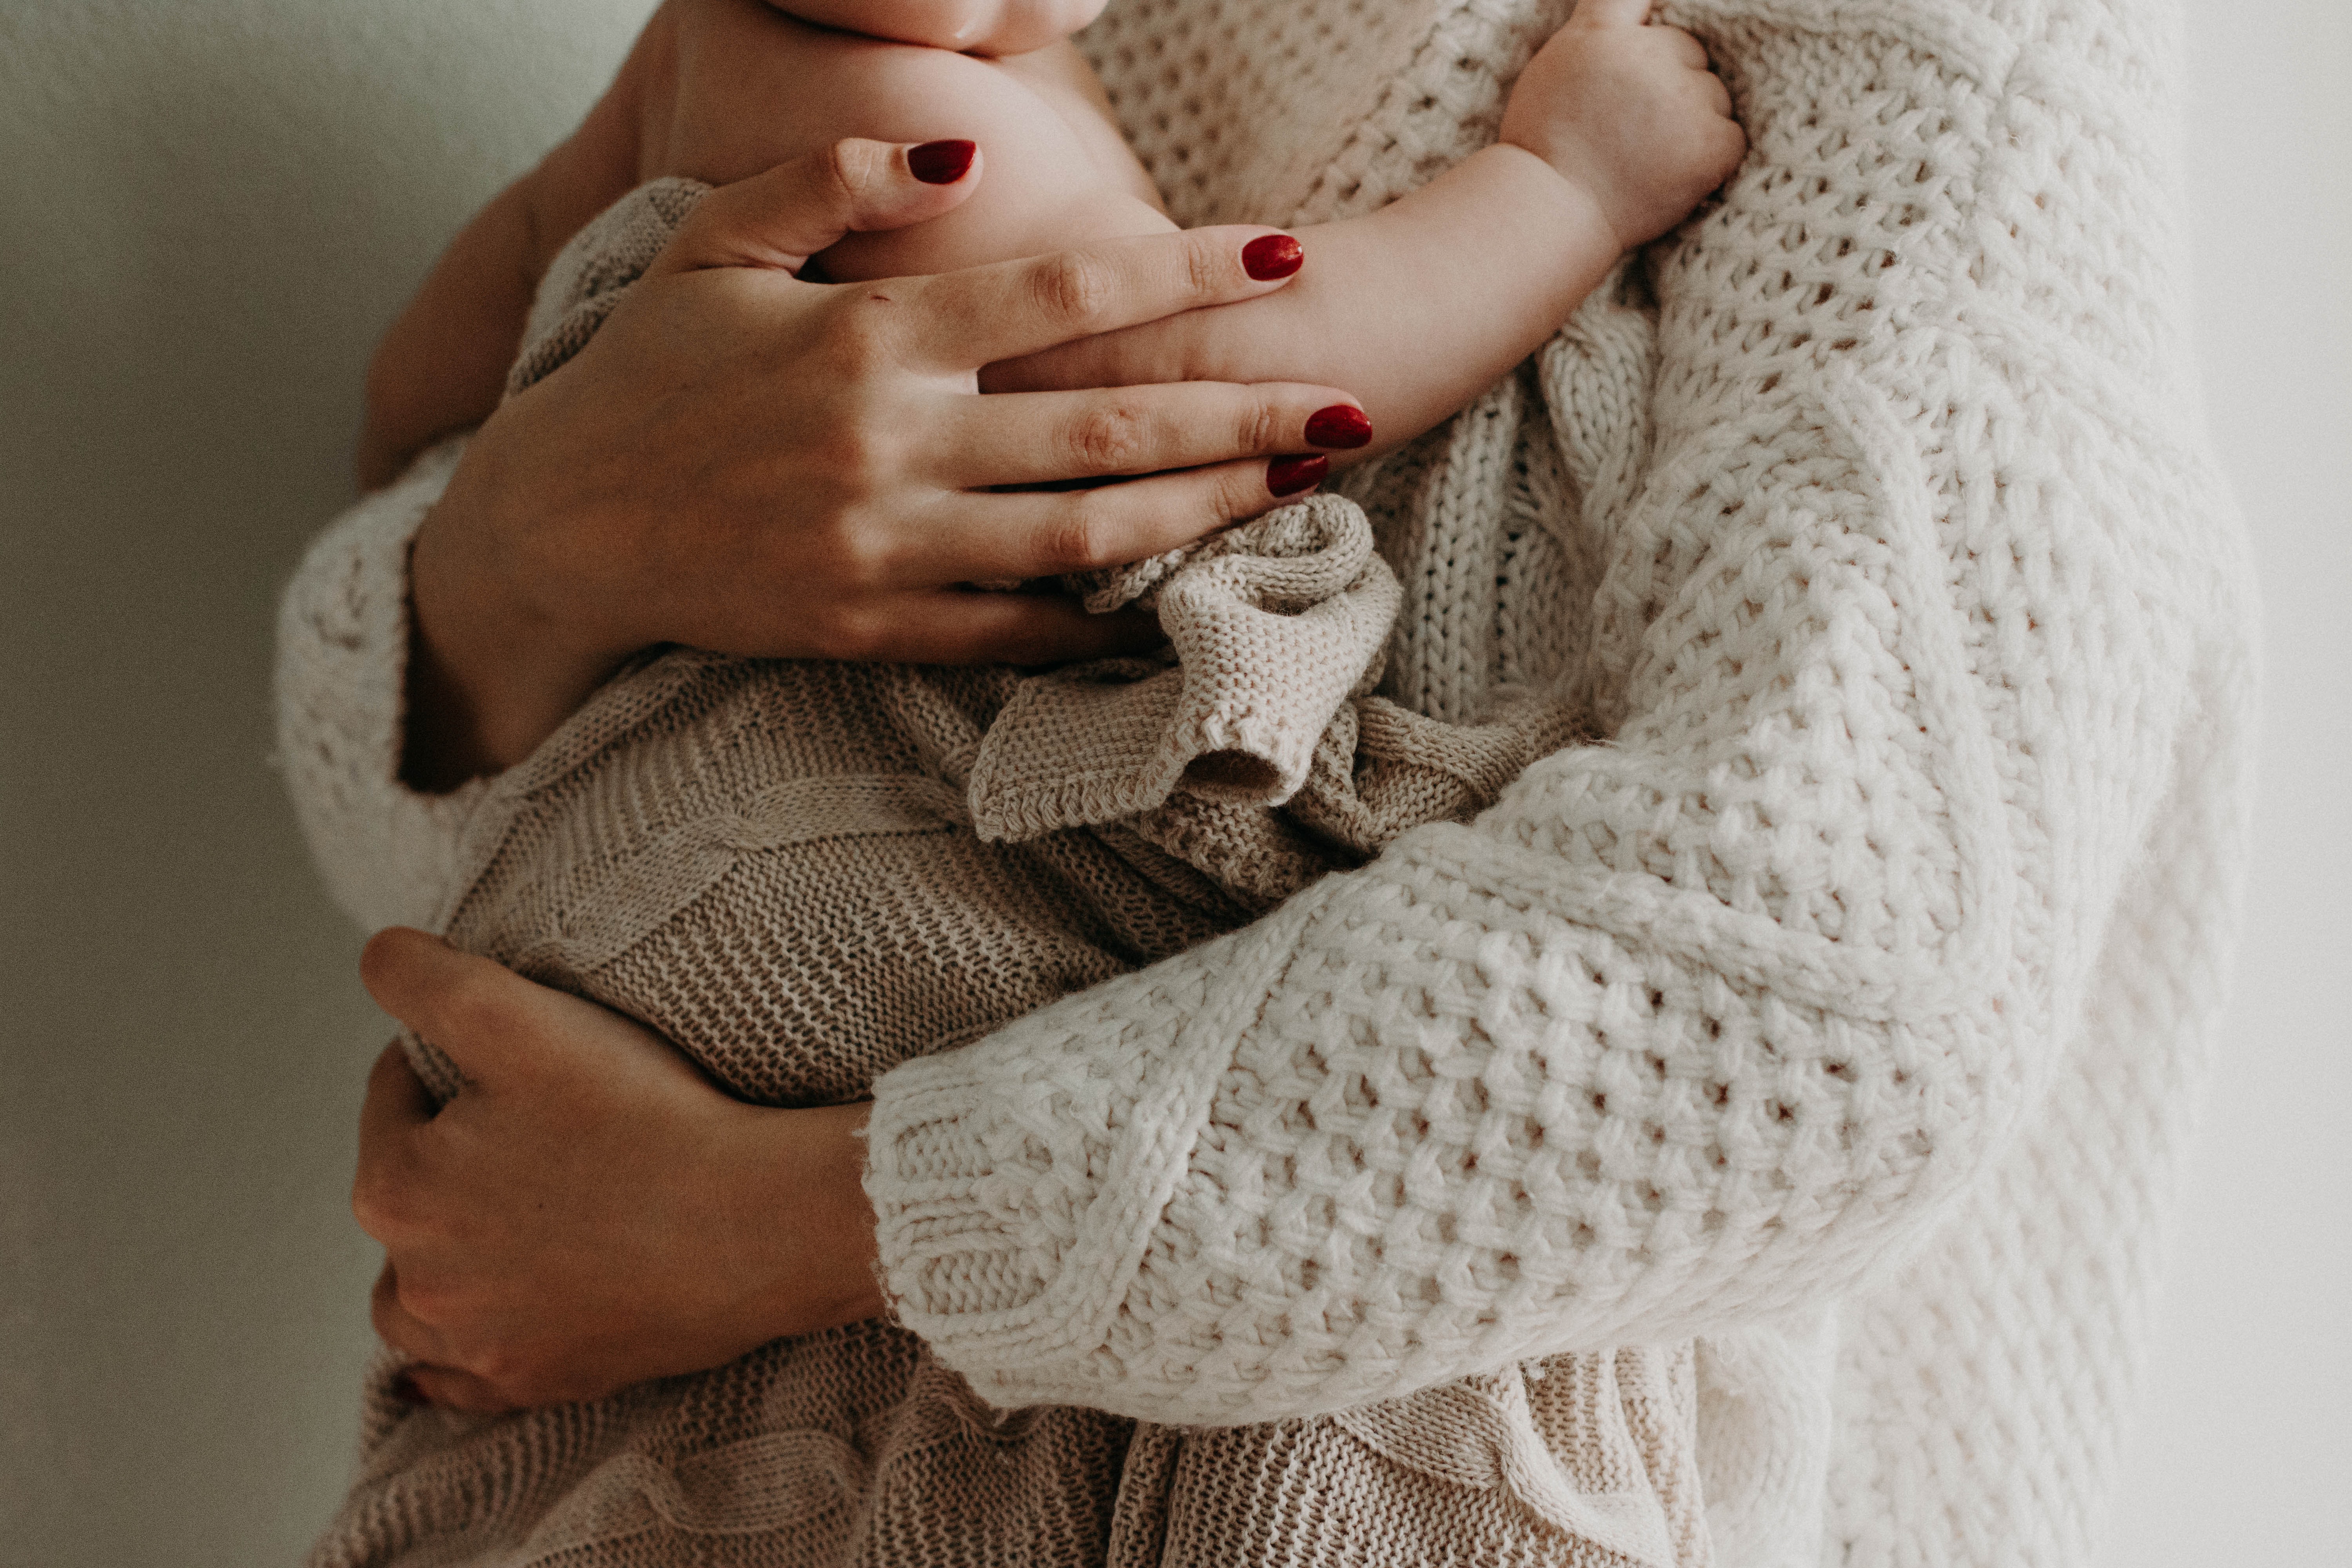 Self-care as a Mom and helping other Moms